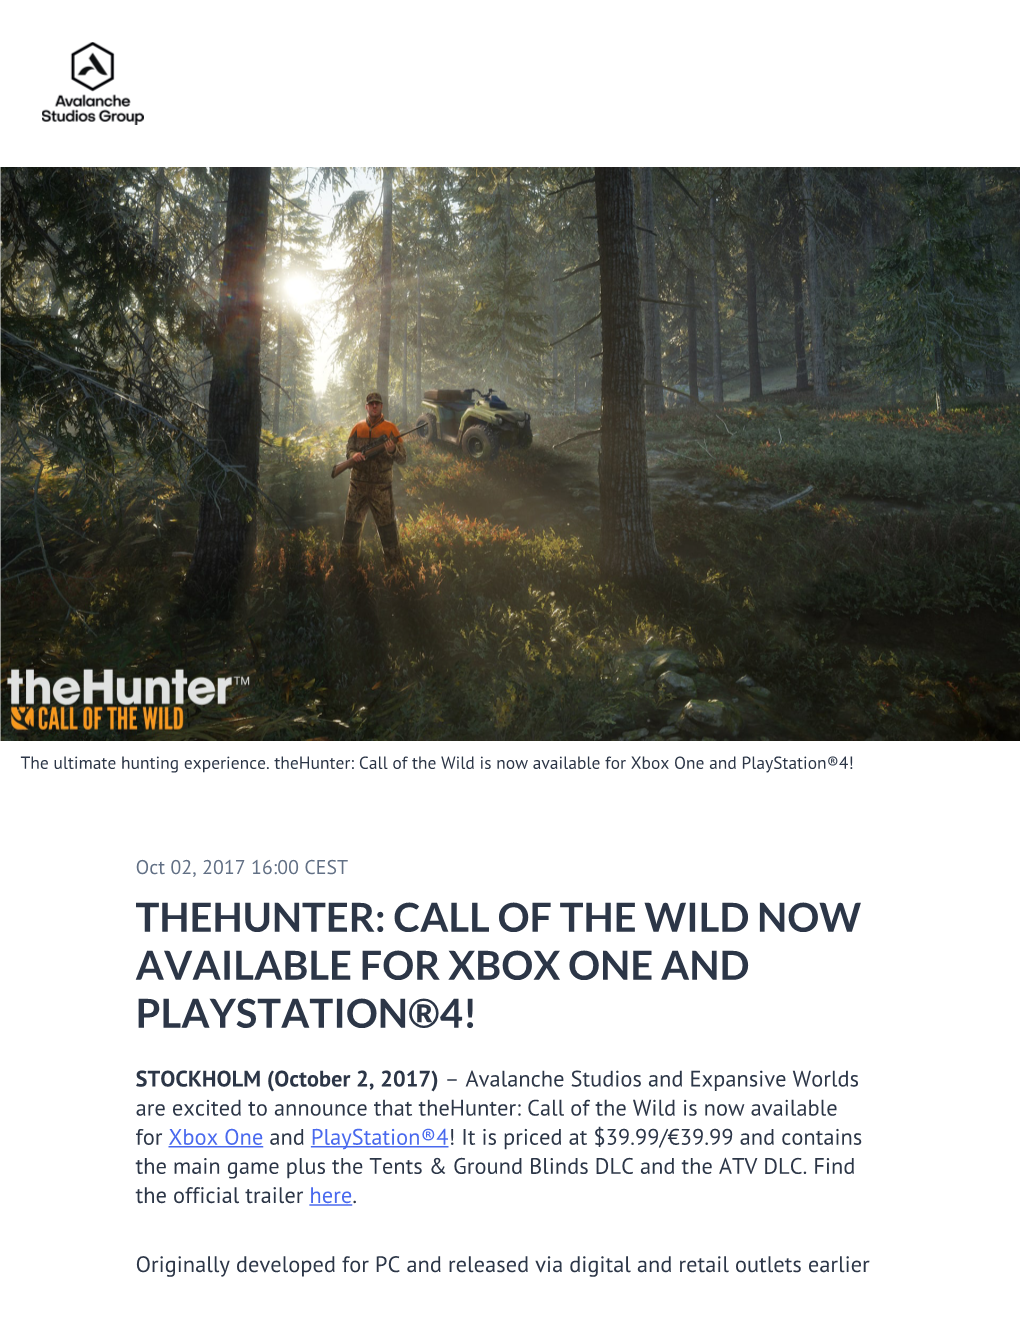 Thehunter: Call of the Wild Now Available for Xbox One and Playstation®4!